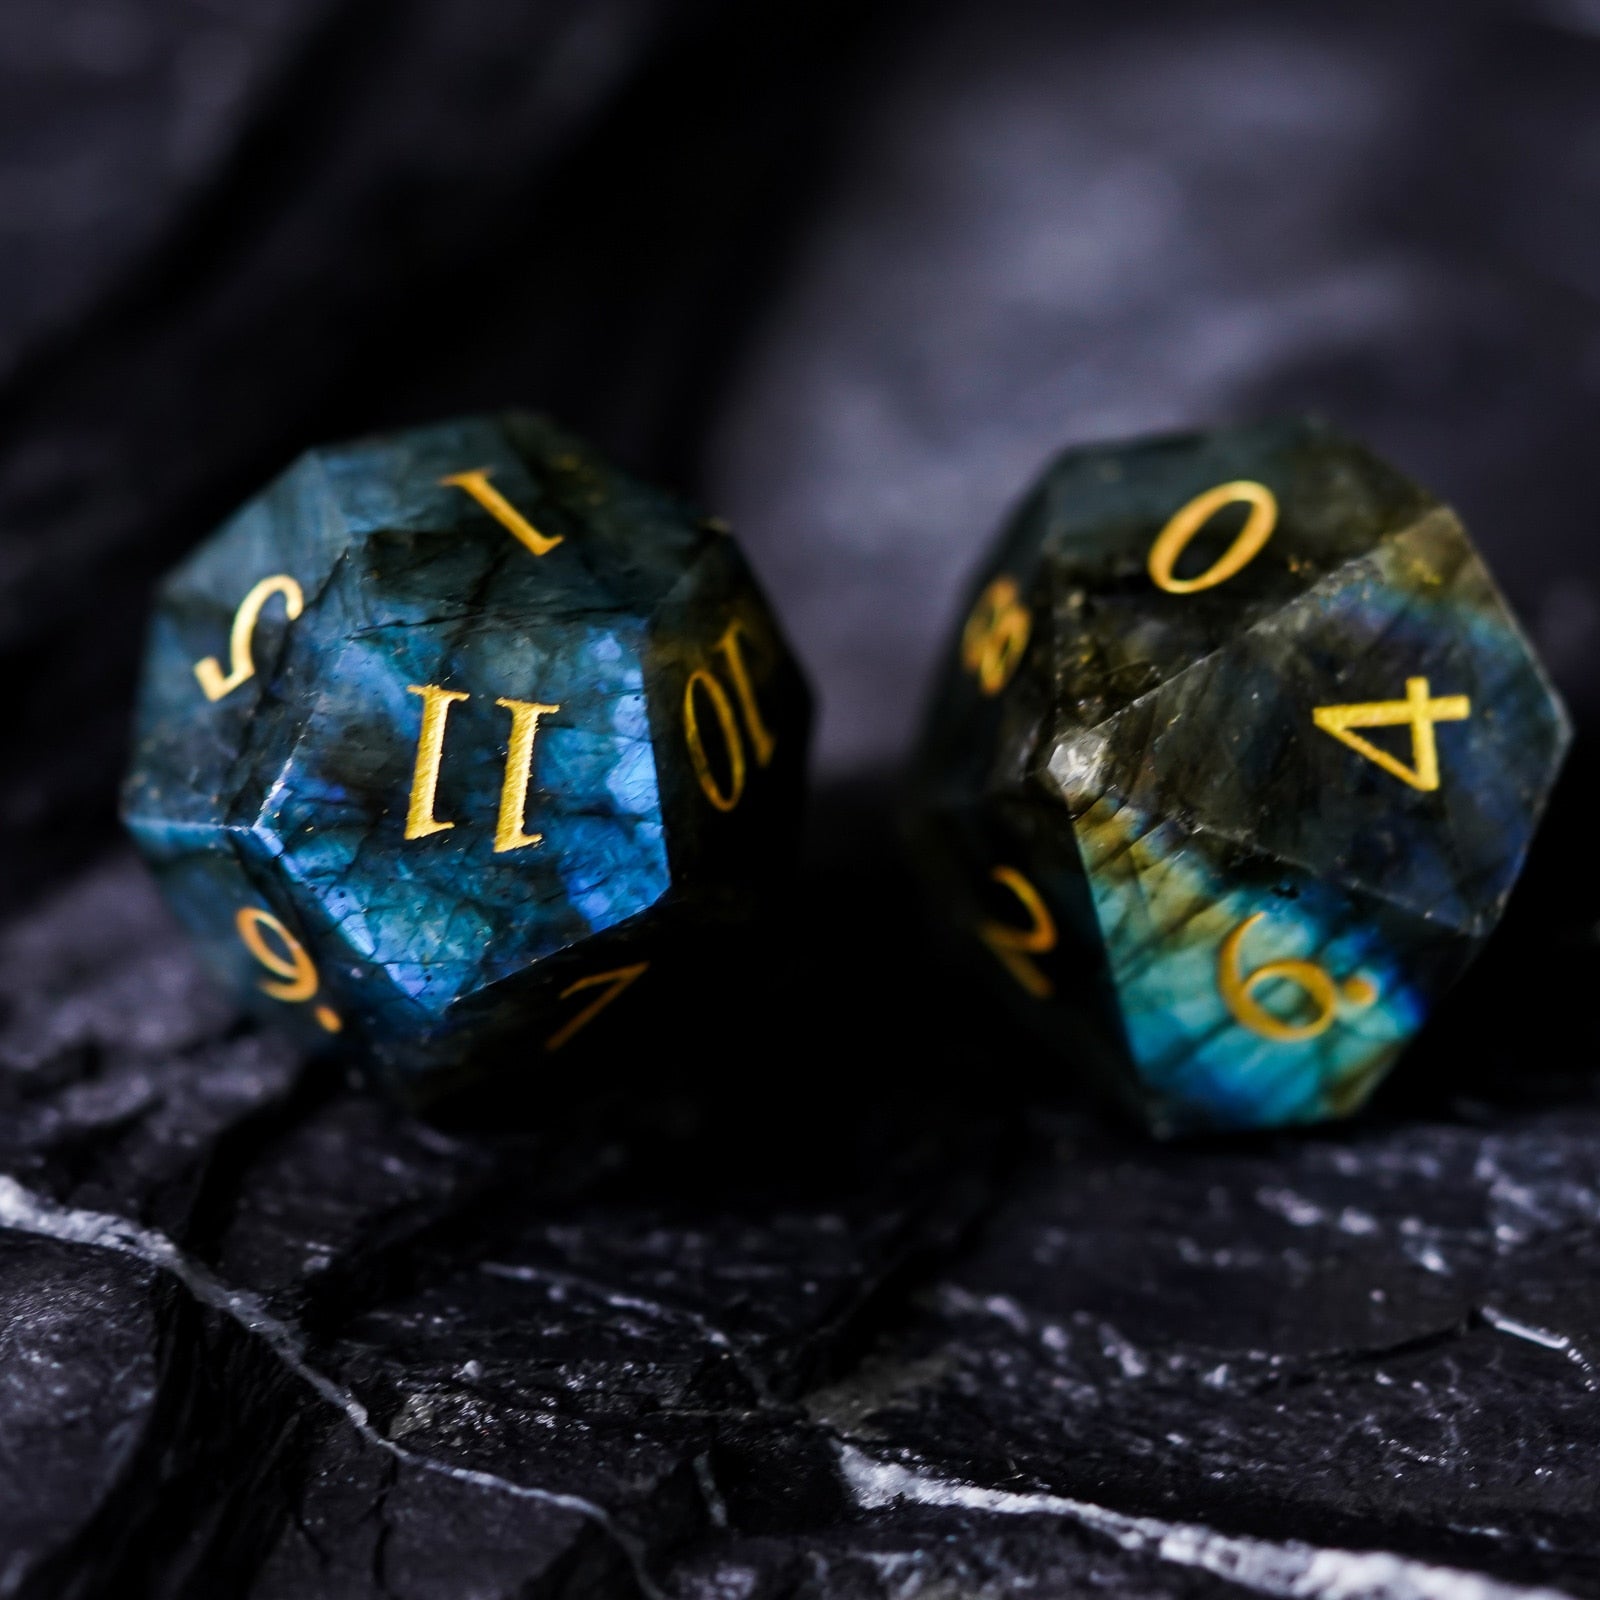 d12 and d10 highlight, dark blues with gold numbers